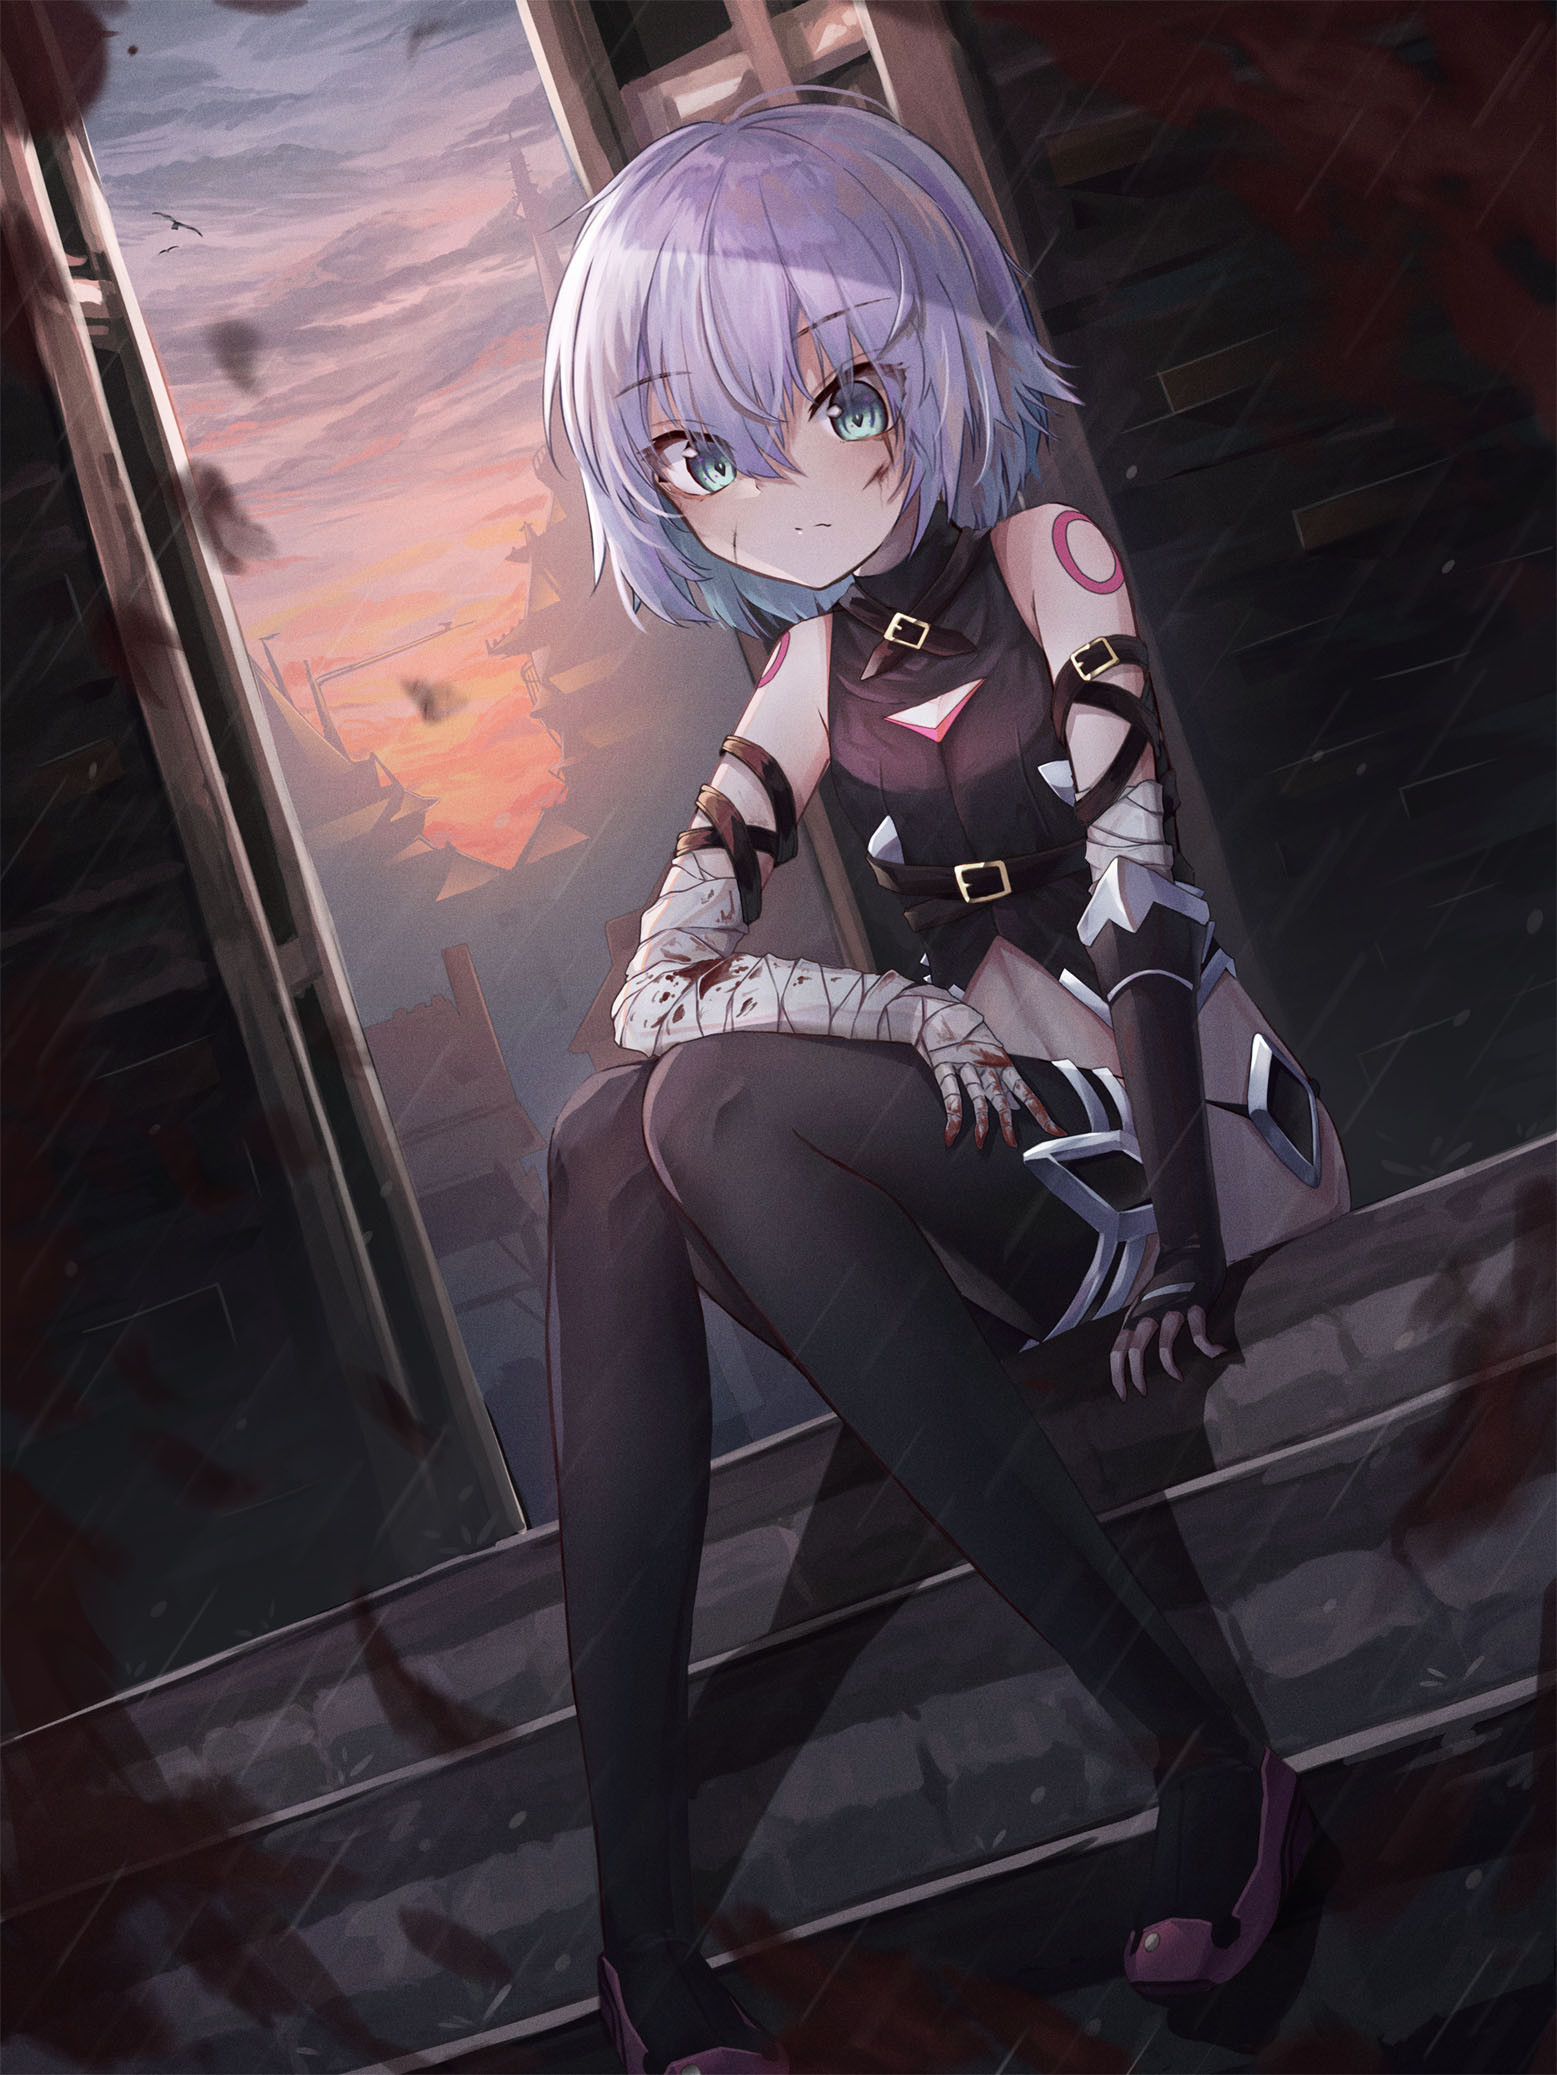 Fate_Series_Fate_Apocrypha_anime_girls_Jack_the_Ripper_Fate_Apocrypha_Assassin_of_Black_loli_grey_hair-1450415.jpg!d